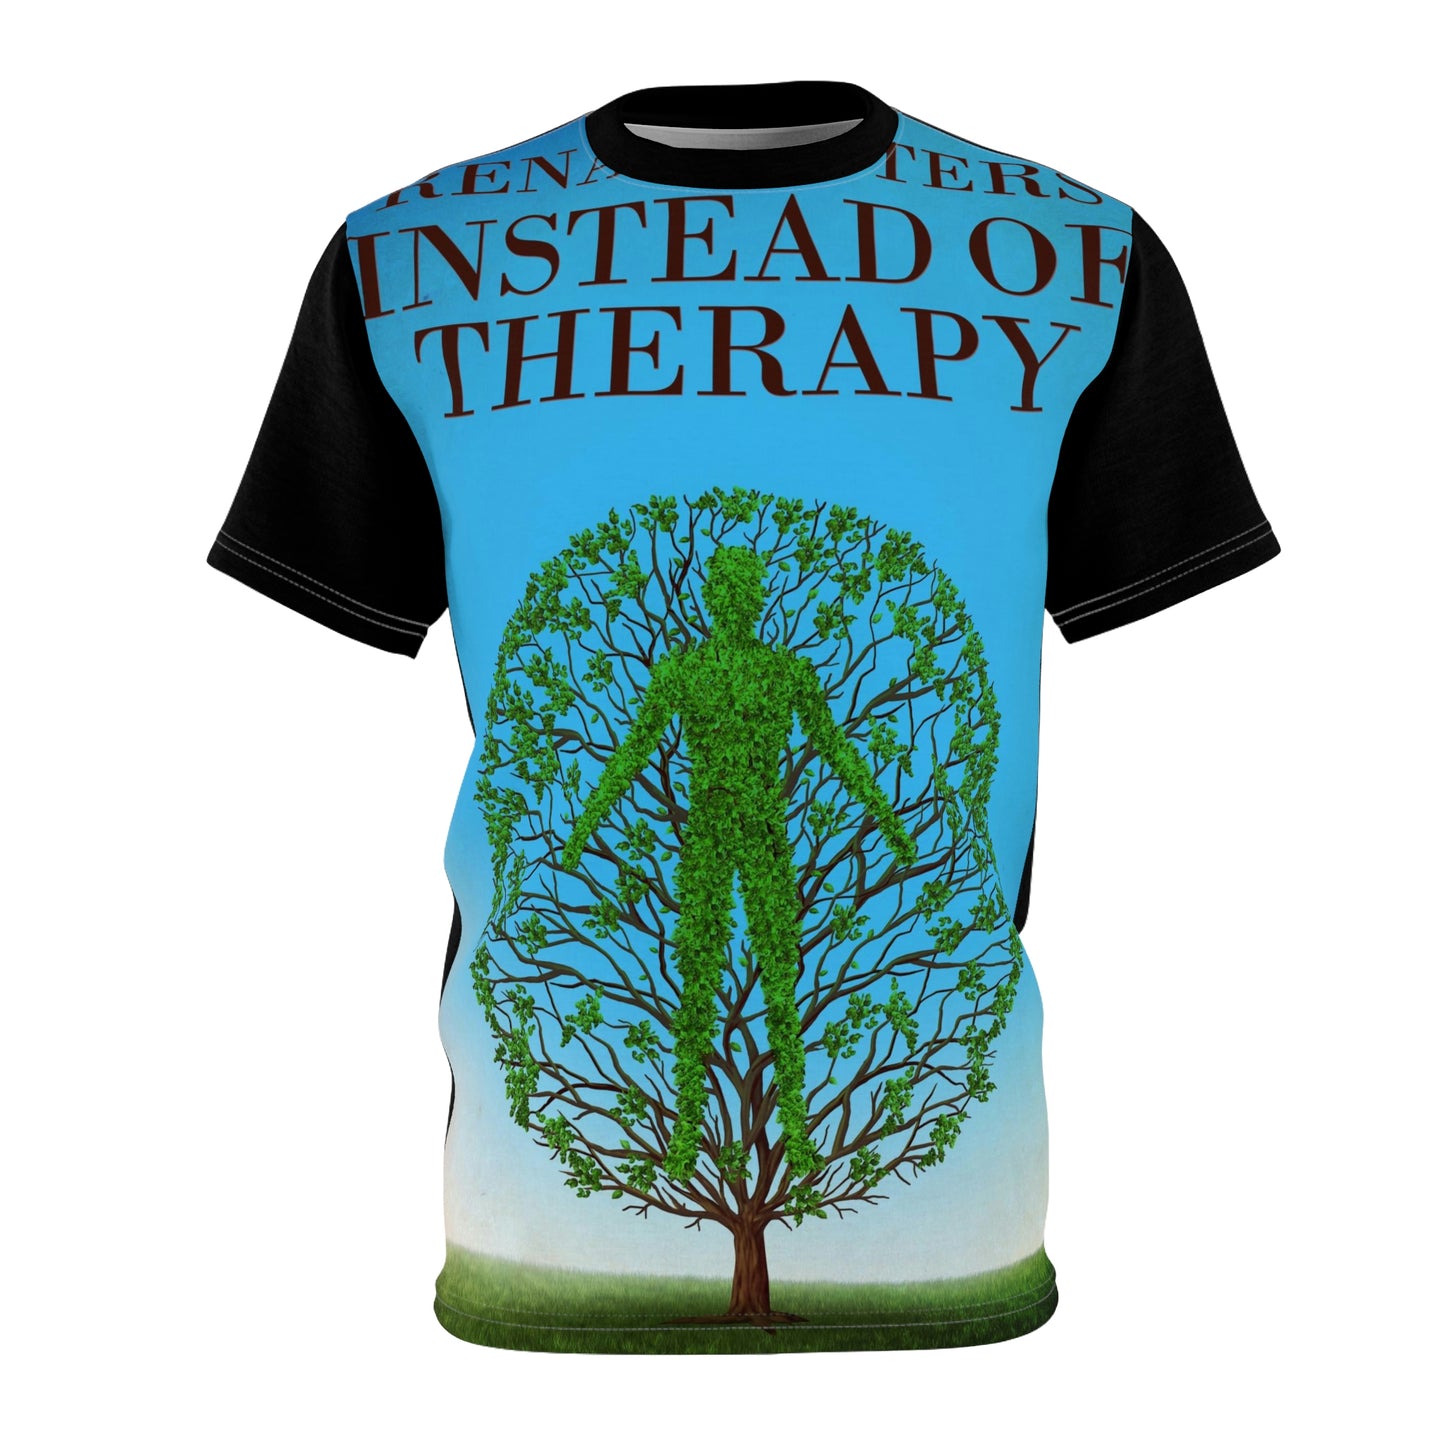 Instead Of Therapy - Unisex All-Over Print Cut & Sew T-Shirt